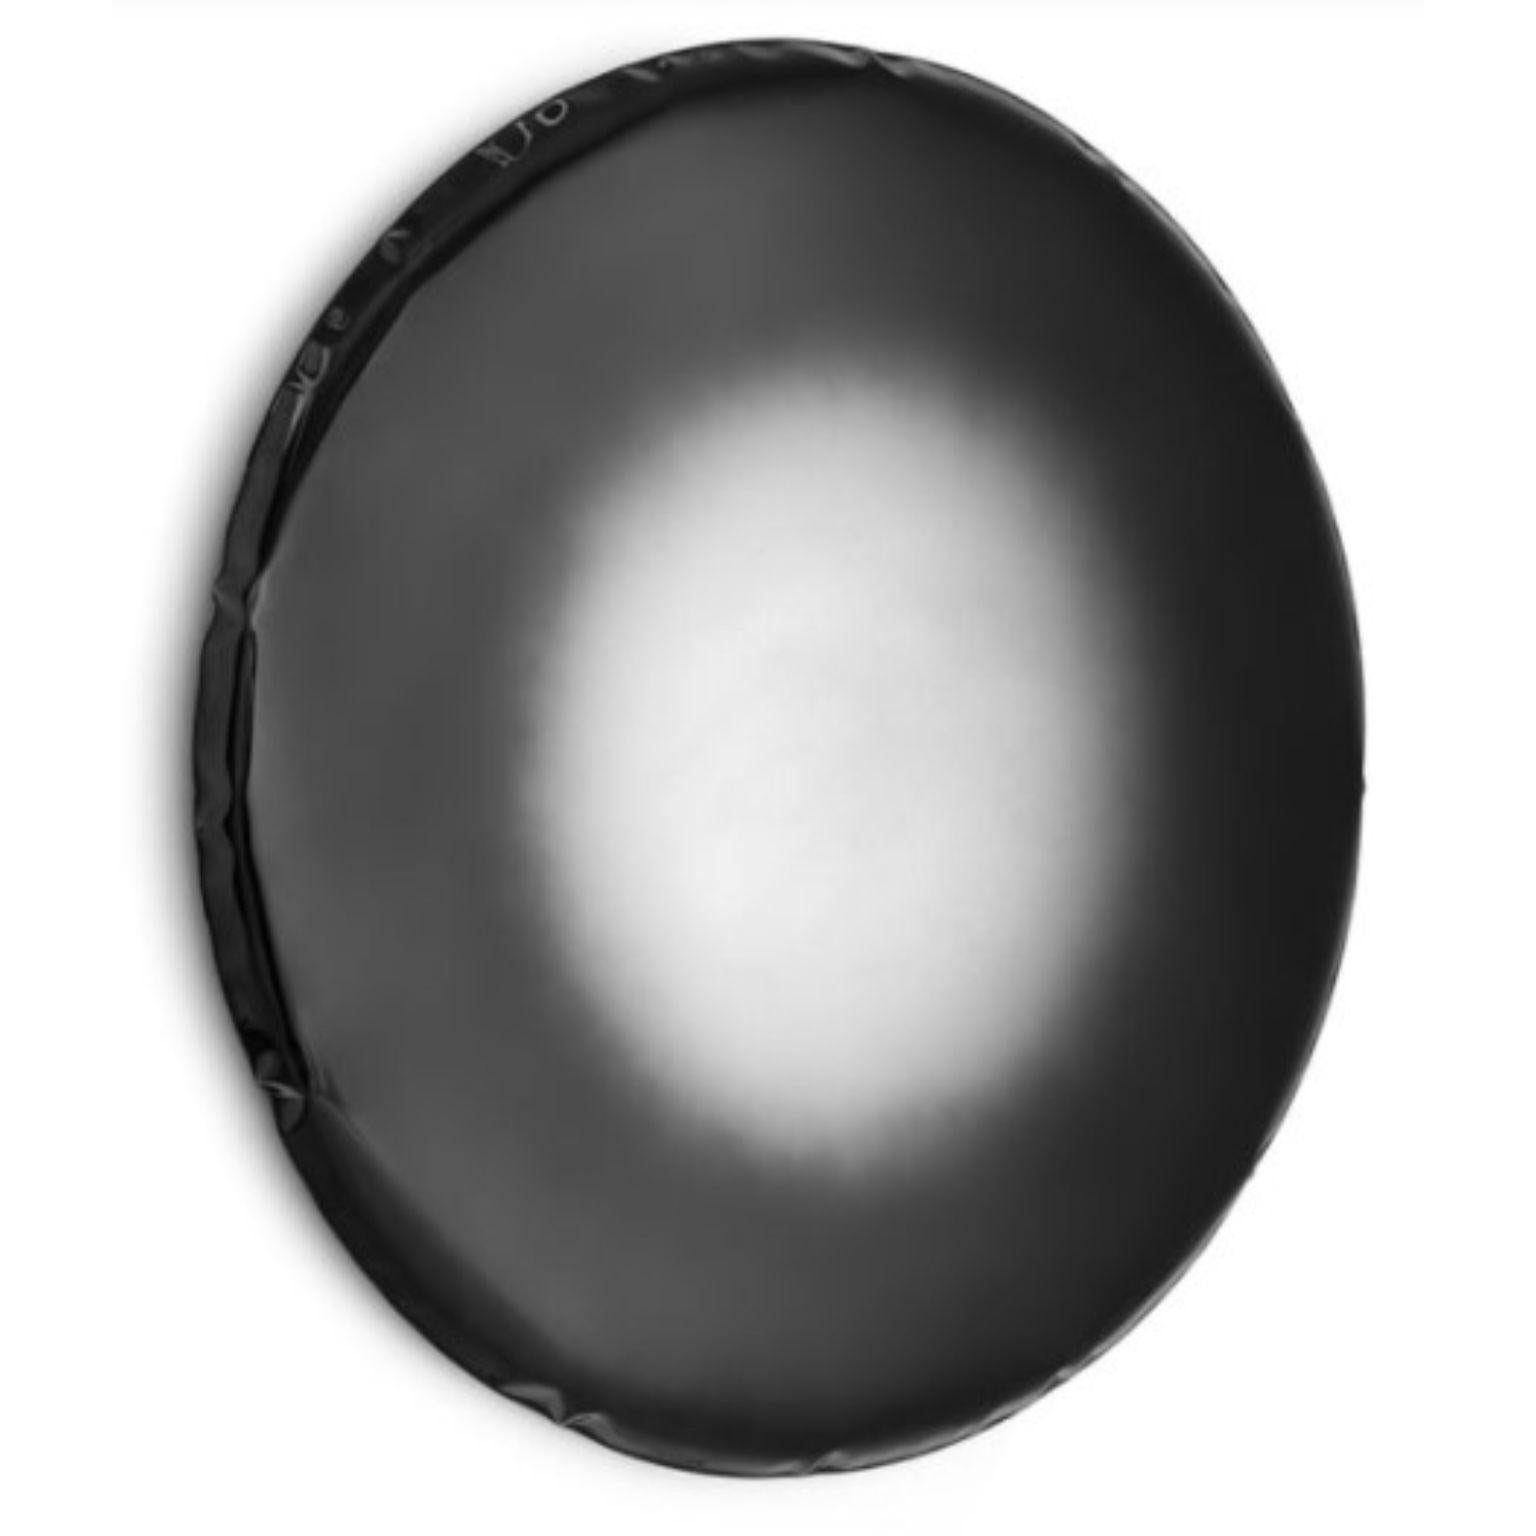 Dark Matter Oko 120 sculptural wall mirror by Zieta
Dimensions: Diameter 120 x Deep 6 cm 
Material: Stainless steel. 
Finish: Dark Matter.
Available in finishes: stainless steel, deep space blue, emerald, saphire, saphire/emerald, dark matter, and